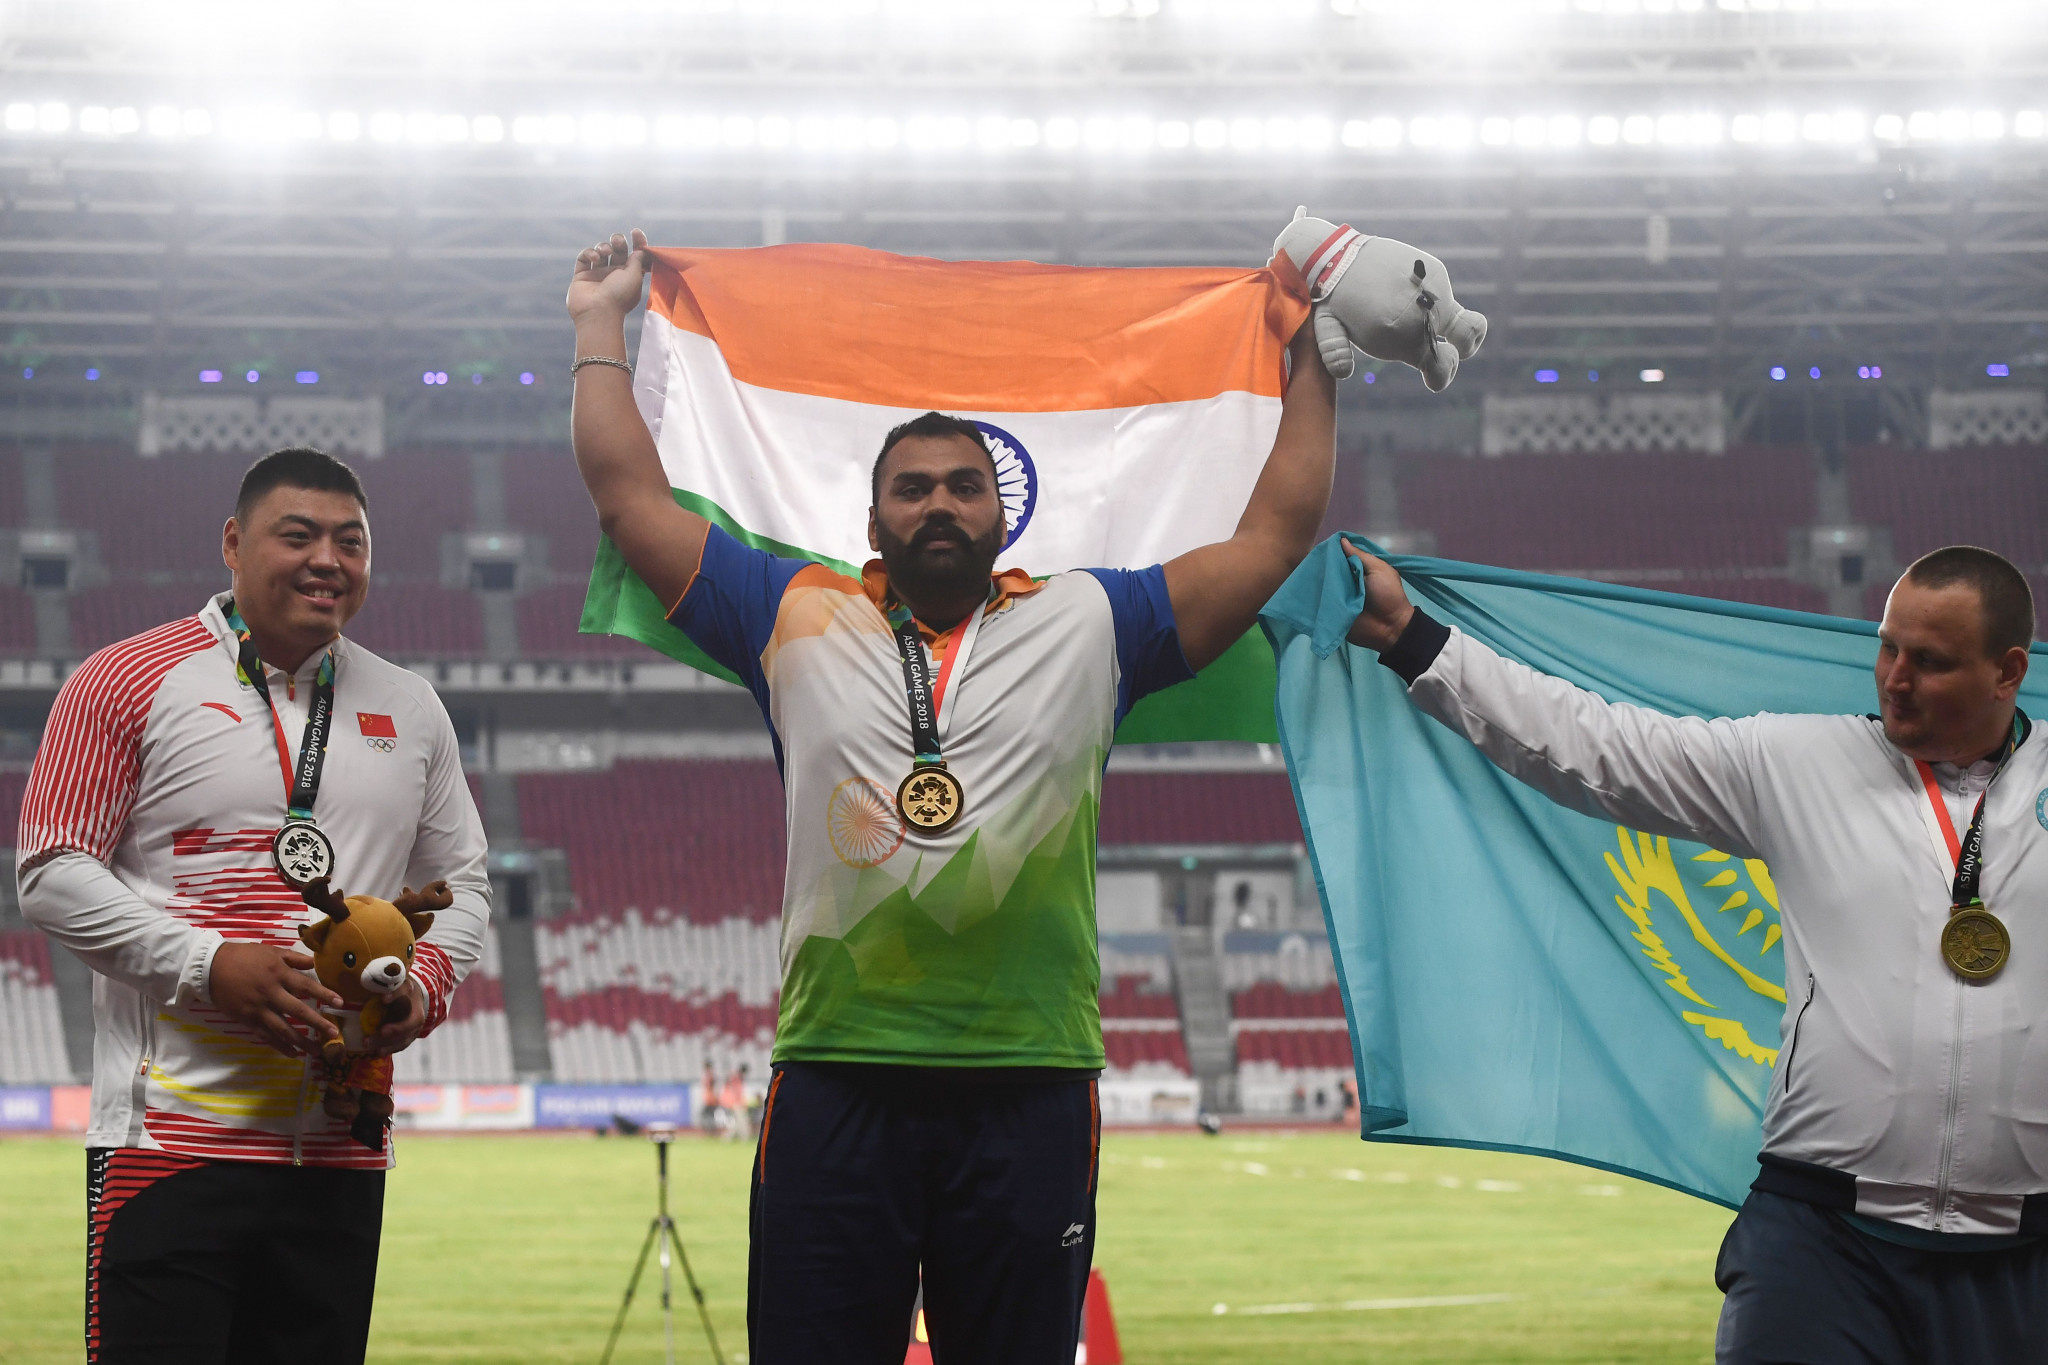 insidethegames is reporting LIVE from the 2018 Asian Games in Jakarta and Palembang